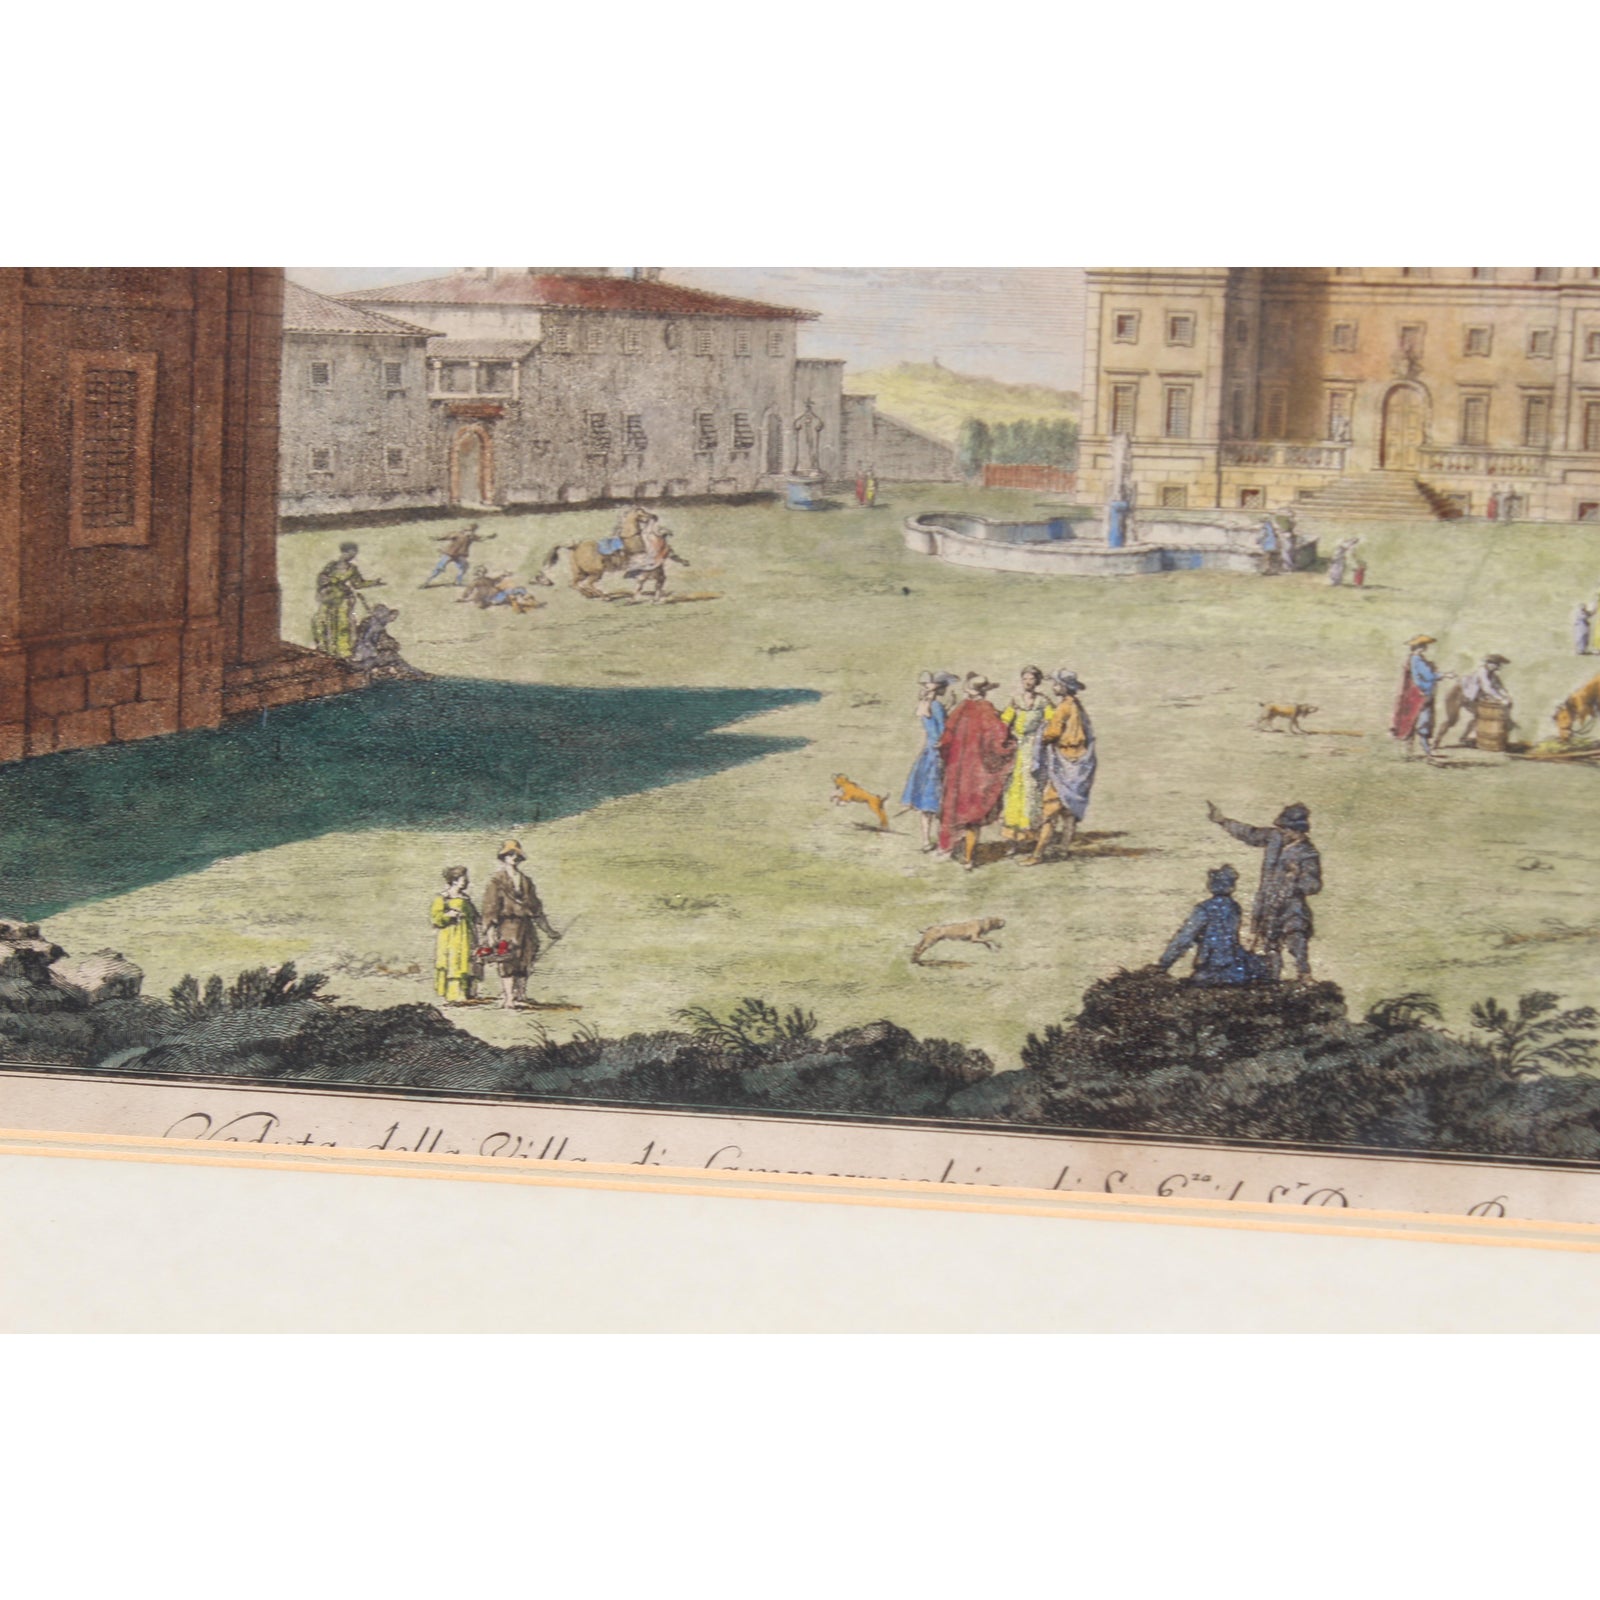 19-century-view-optique-later-drawing-in-frame-1996